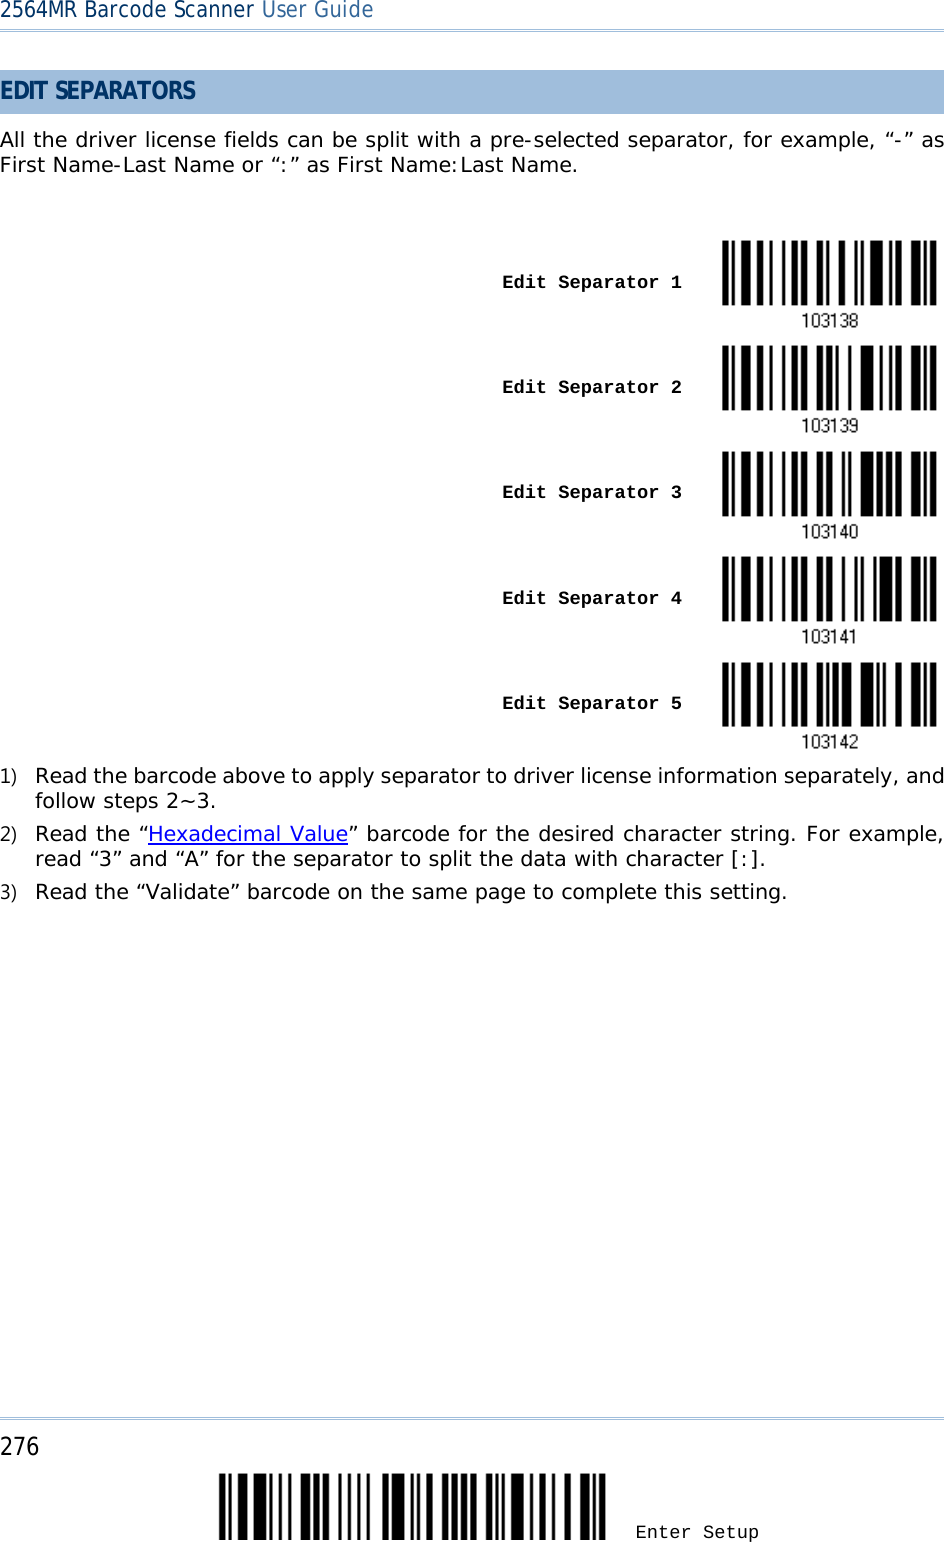 2564MR Barcode Scanner User Guide  EDIT SEPARATORS  All the driver license fields can be split with a pre-selected separator, for example, “-” as First Name-Last Name or “:” as First Name:Last Name.    Edit Separator 1    Edit Separator 2    Edit Separator 3    Edit Separator 4    Edit Separator 5  1) Read the barcode above to apply separator to driver license information separately, and follow steps 2~3.  2) Read the “Hexadecimal Value” barcode for the desired character string. For example, read “3” and “A” for the separator to split the data with character [:]. 3) Read the “Validate” barcode on the same page to complete this setting. 276 Enter Setup 